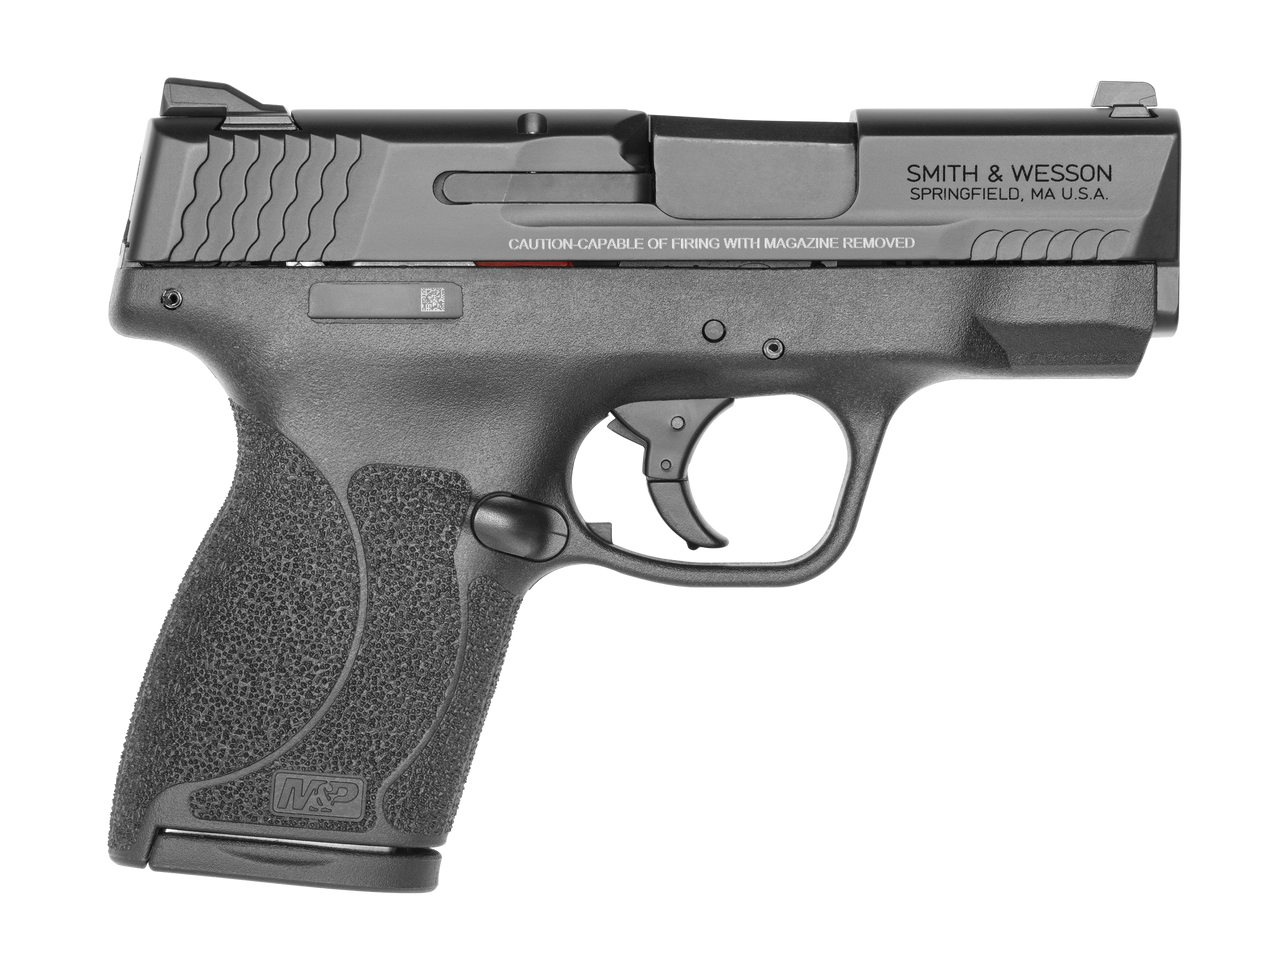 Smith & Wesson M&P45 Shield M2.0 - Thumb Safety